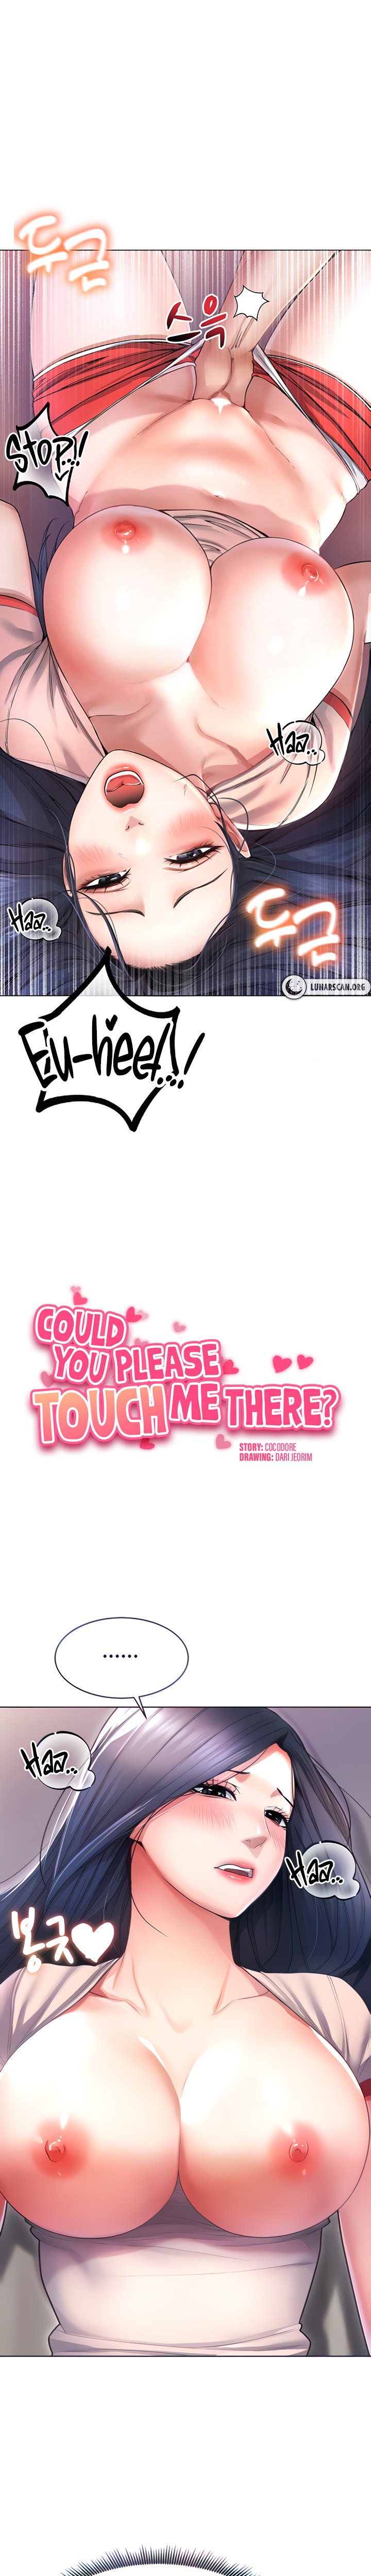 Could You Please Touch Me There? - Chapter 5 Page 1